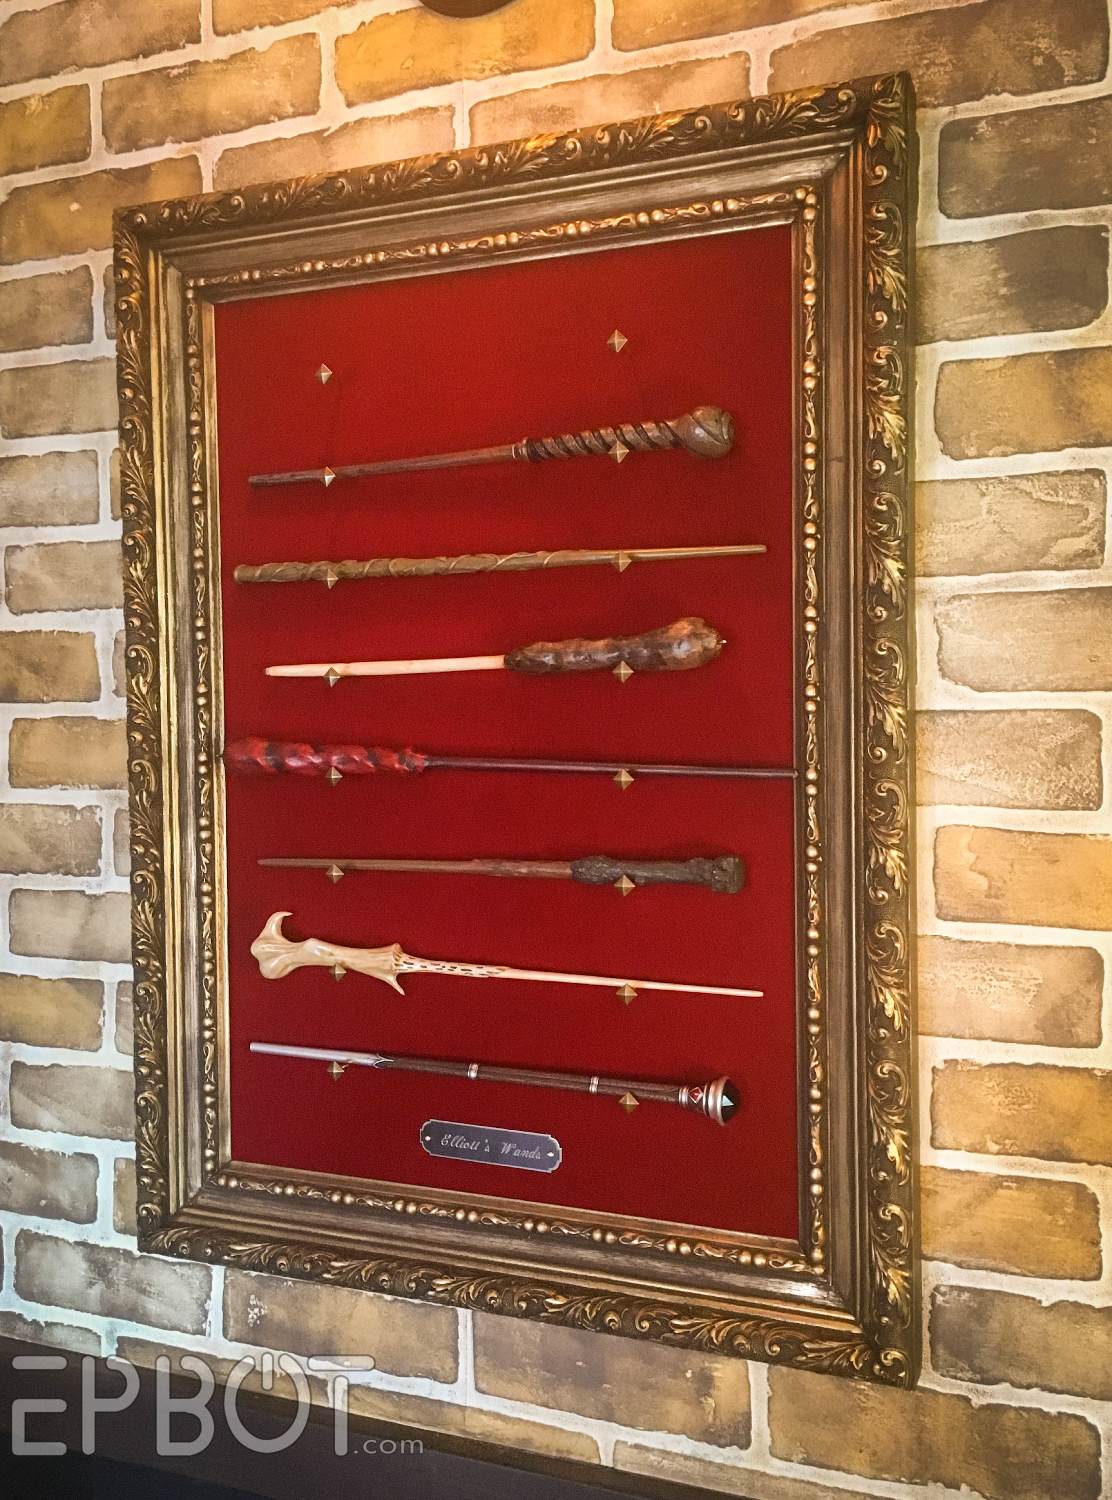 Epbot Make Your Own Framed Wand Display Perfect For Wizarding World Wands